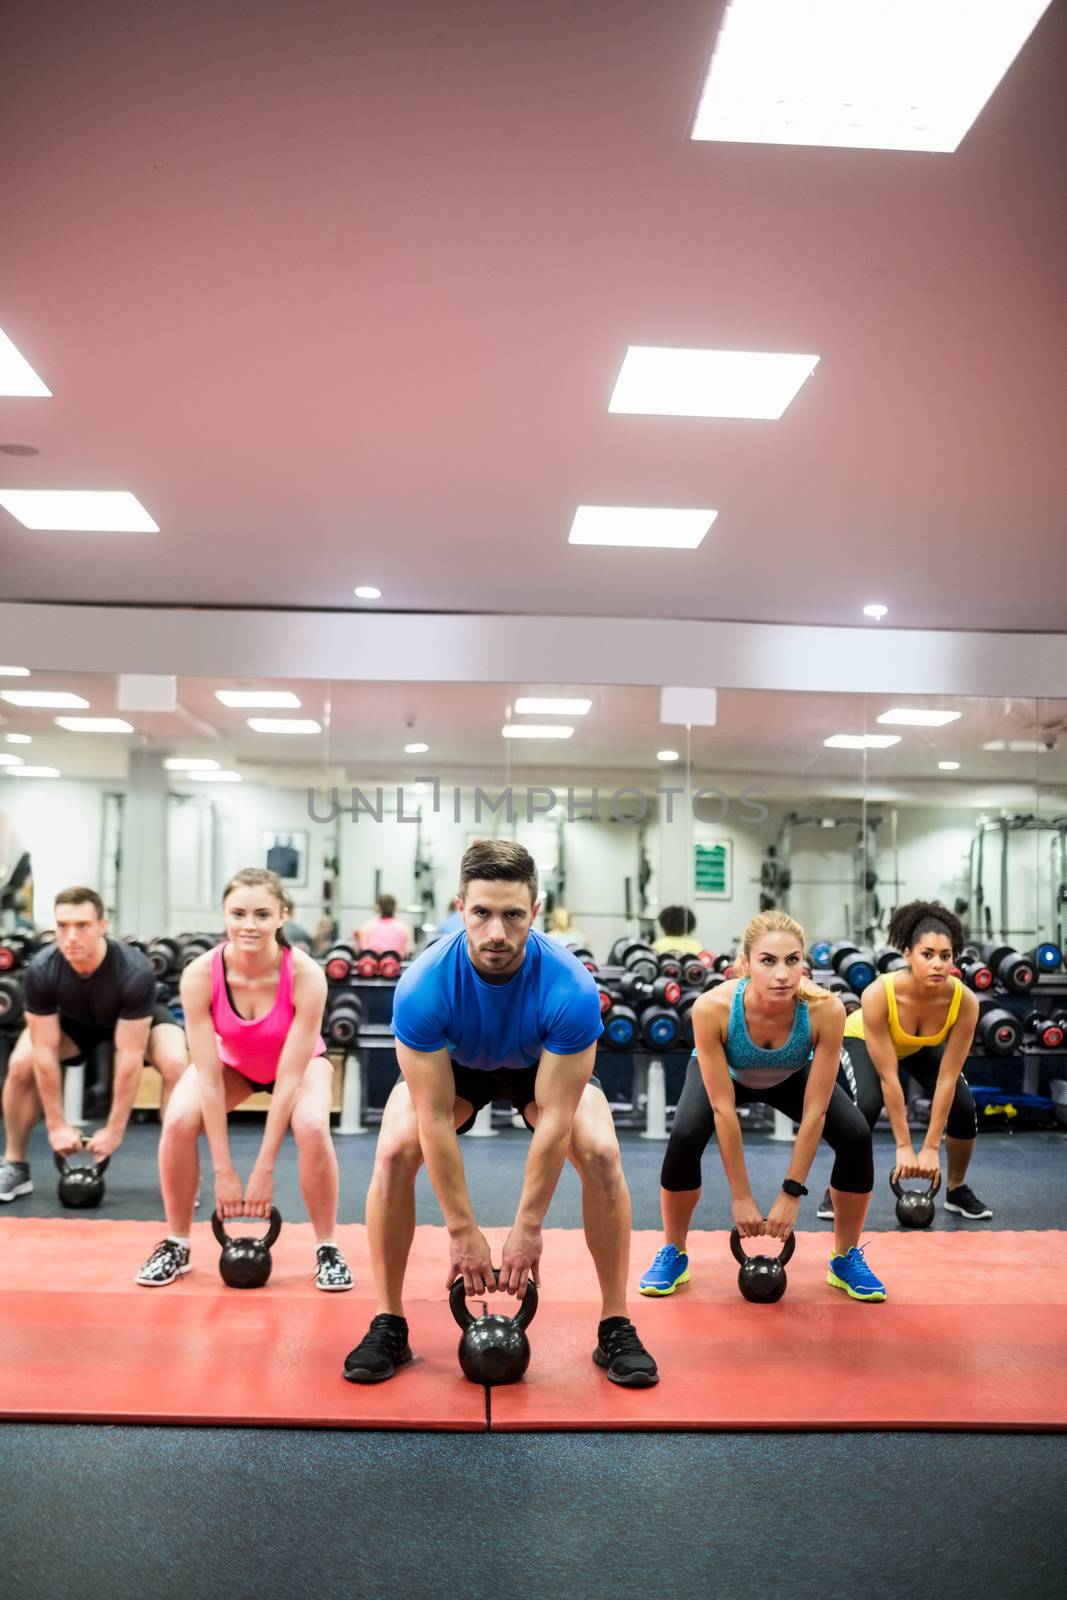 Fit people working out in fitness class by Wavebreakmedia